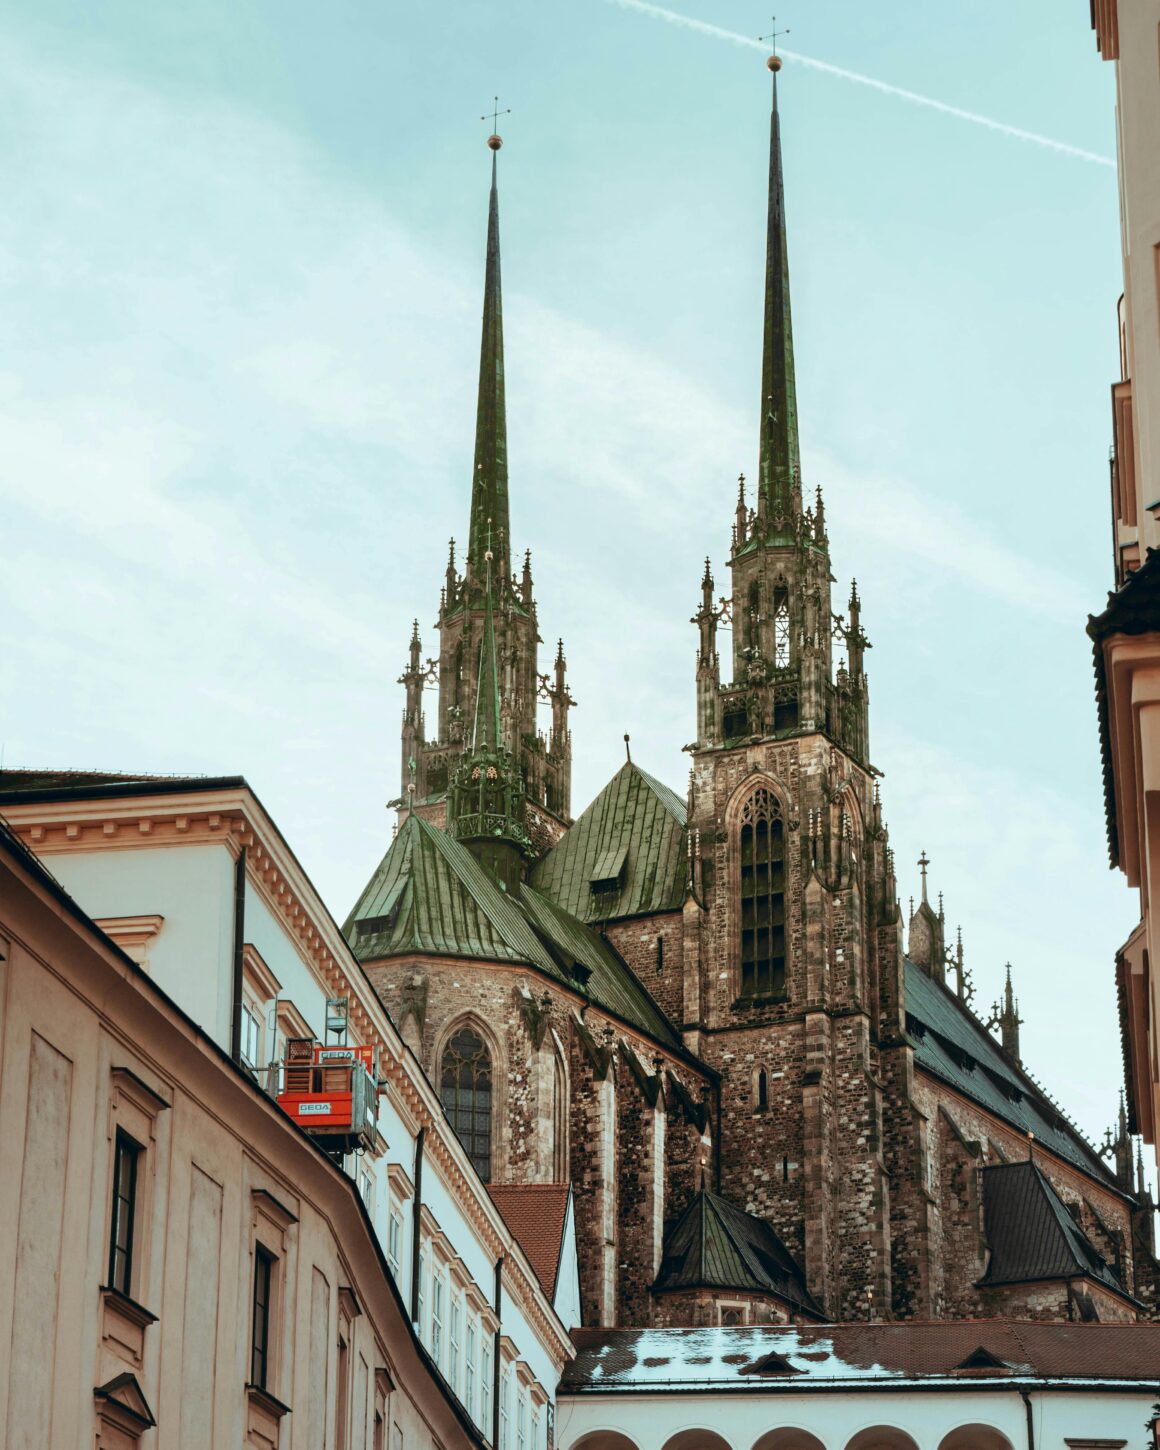 The castle and historical sights in Brno, Czech Republic, the capital of Moravia